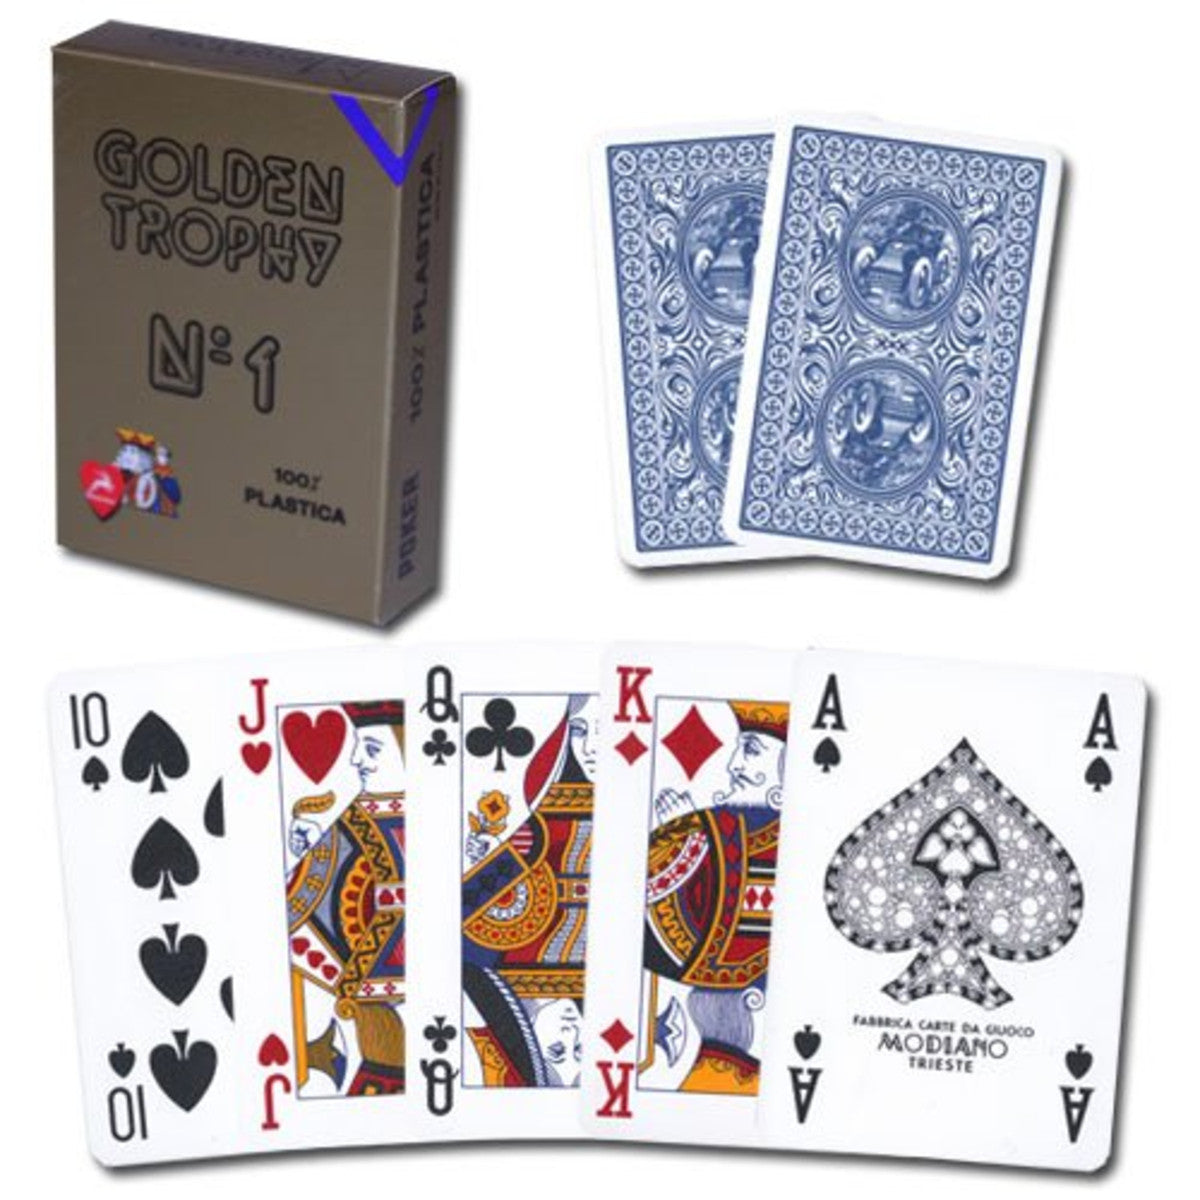 Modiano Golden Trophy Poker Pla - Classic - Game On